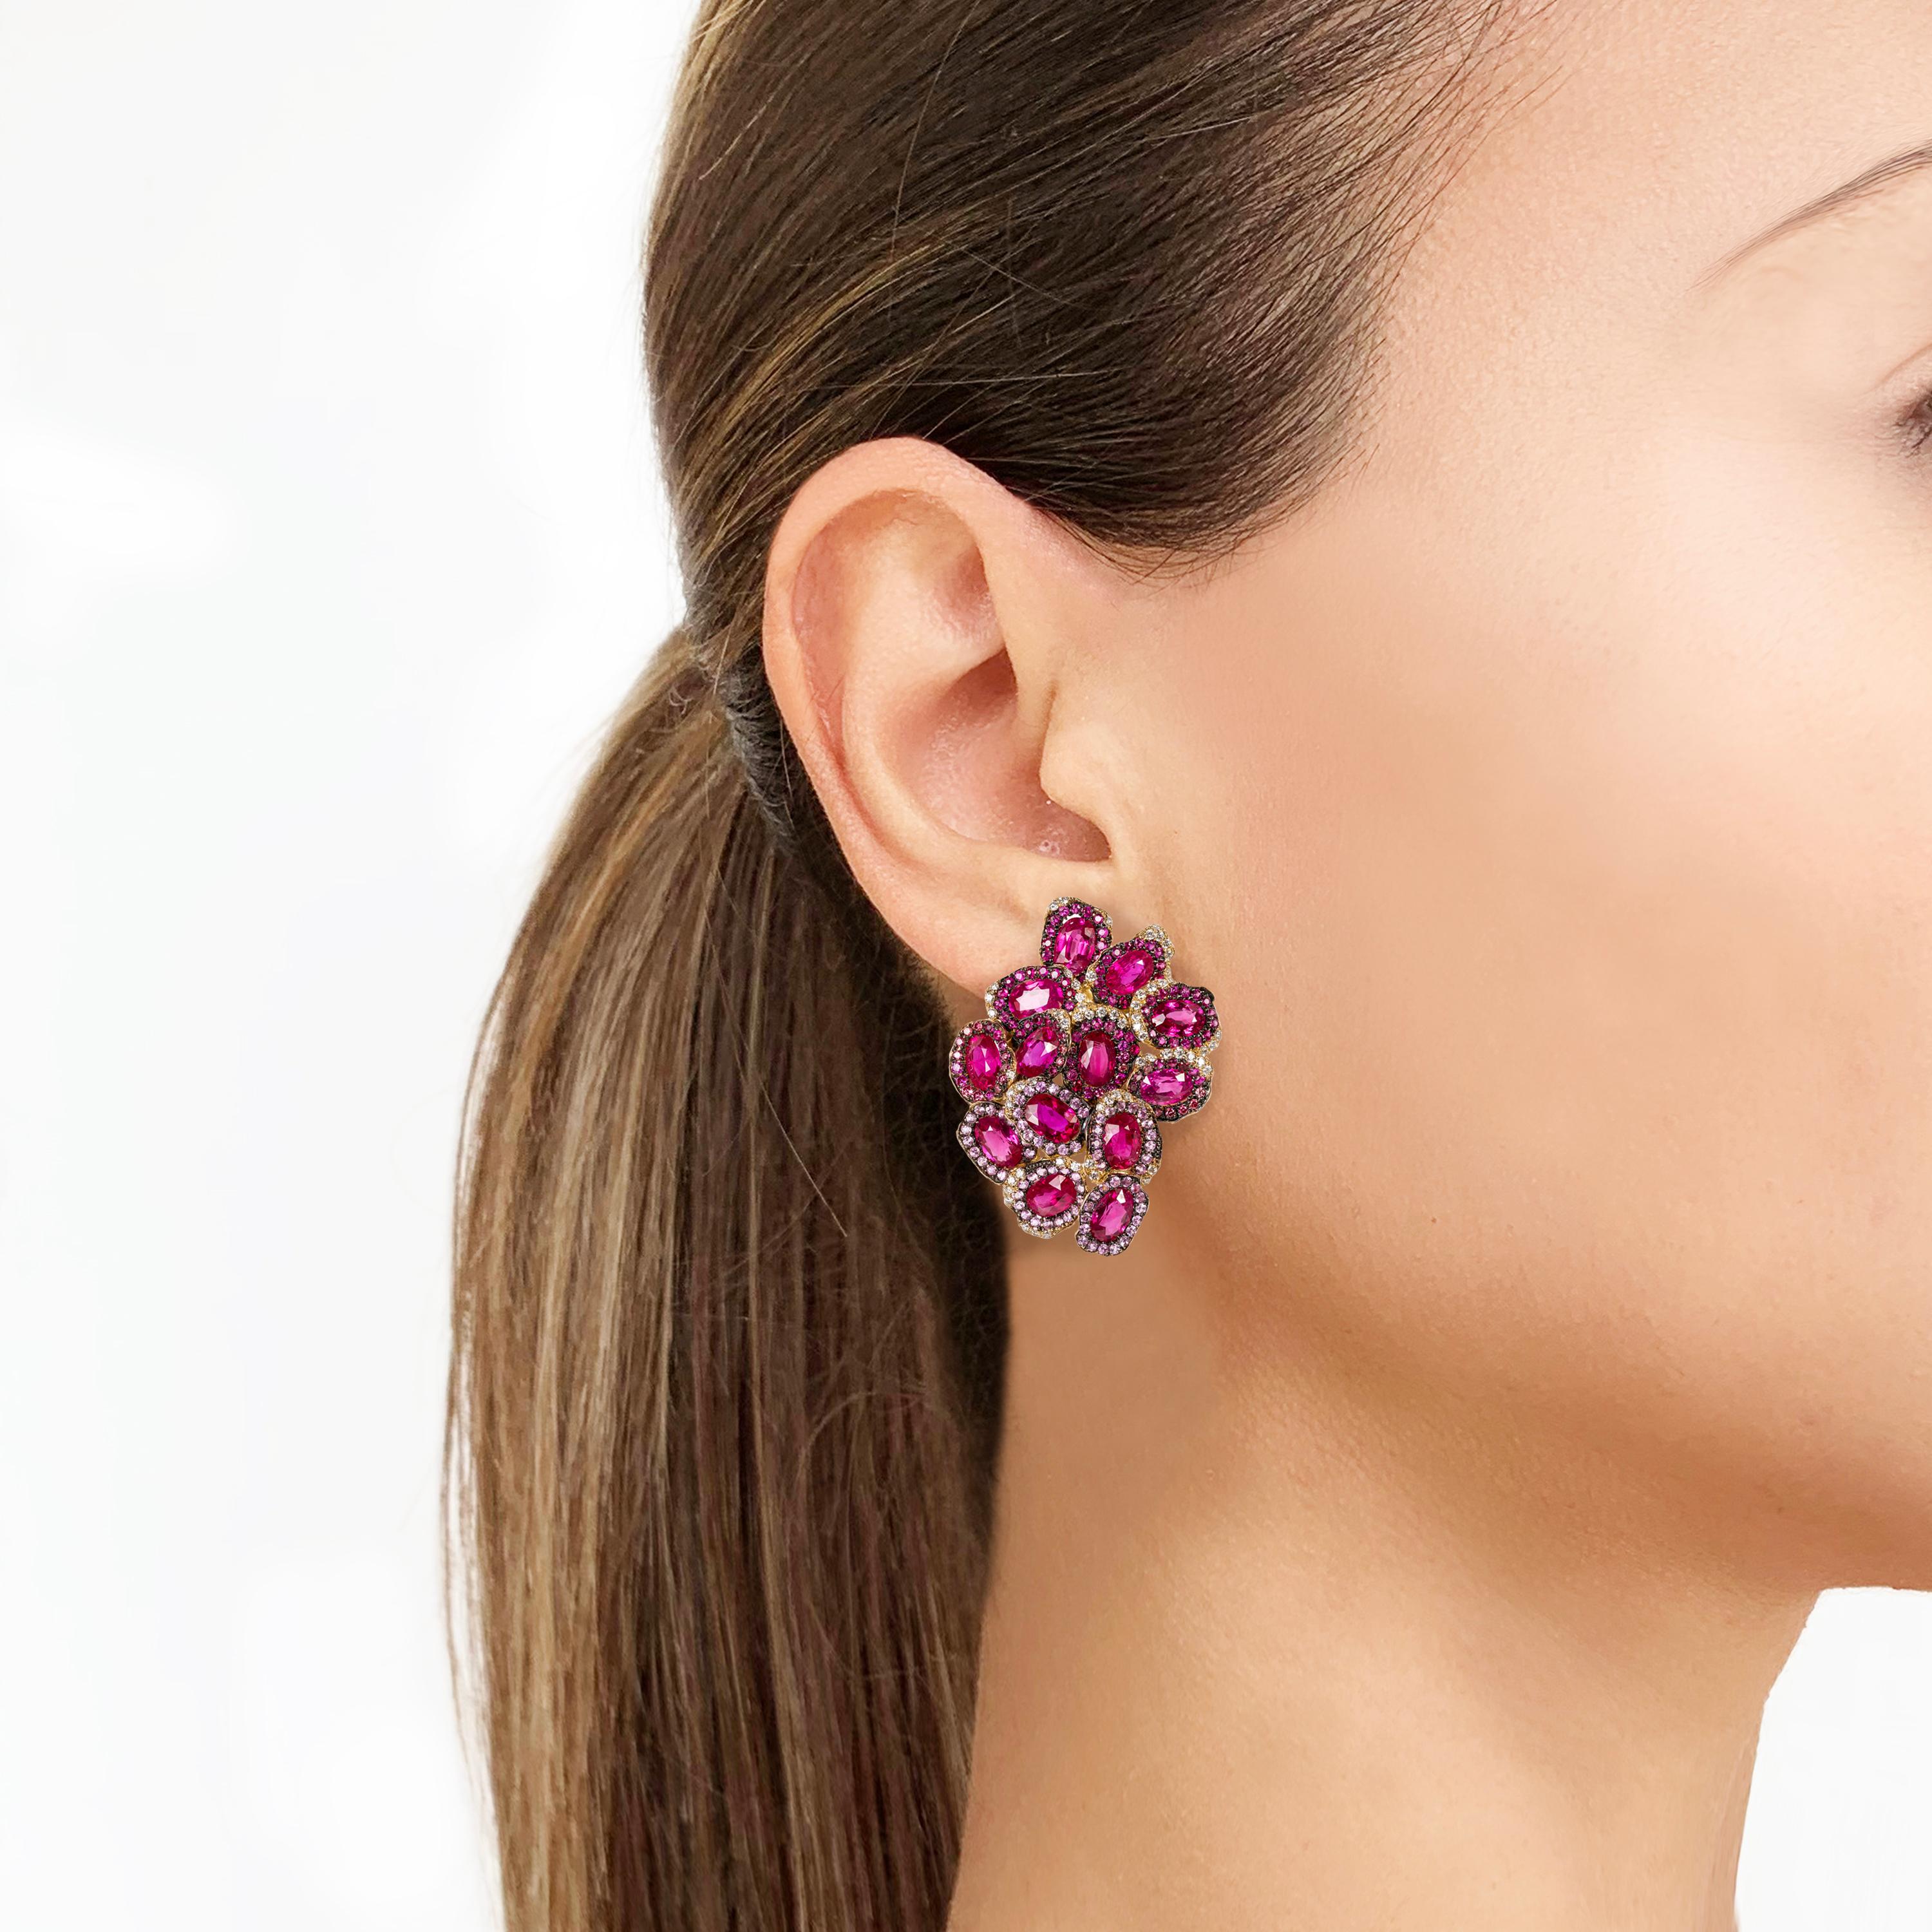 Rosior by Manuel Rosas Contemporary Drop Earrings manufactured in Yellow Gold and setted with:
- 26 Oval cut Rubies with 16 ct;
- 134 Round Cut Rubies with 1,04 ct;
- 146 Pink Sapphires with 1,16 ct;
- 73 Pink Diamonds with 0,44 ct;
- 131 White